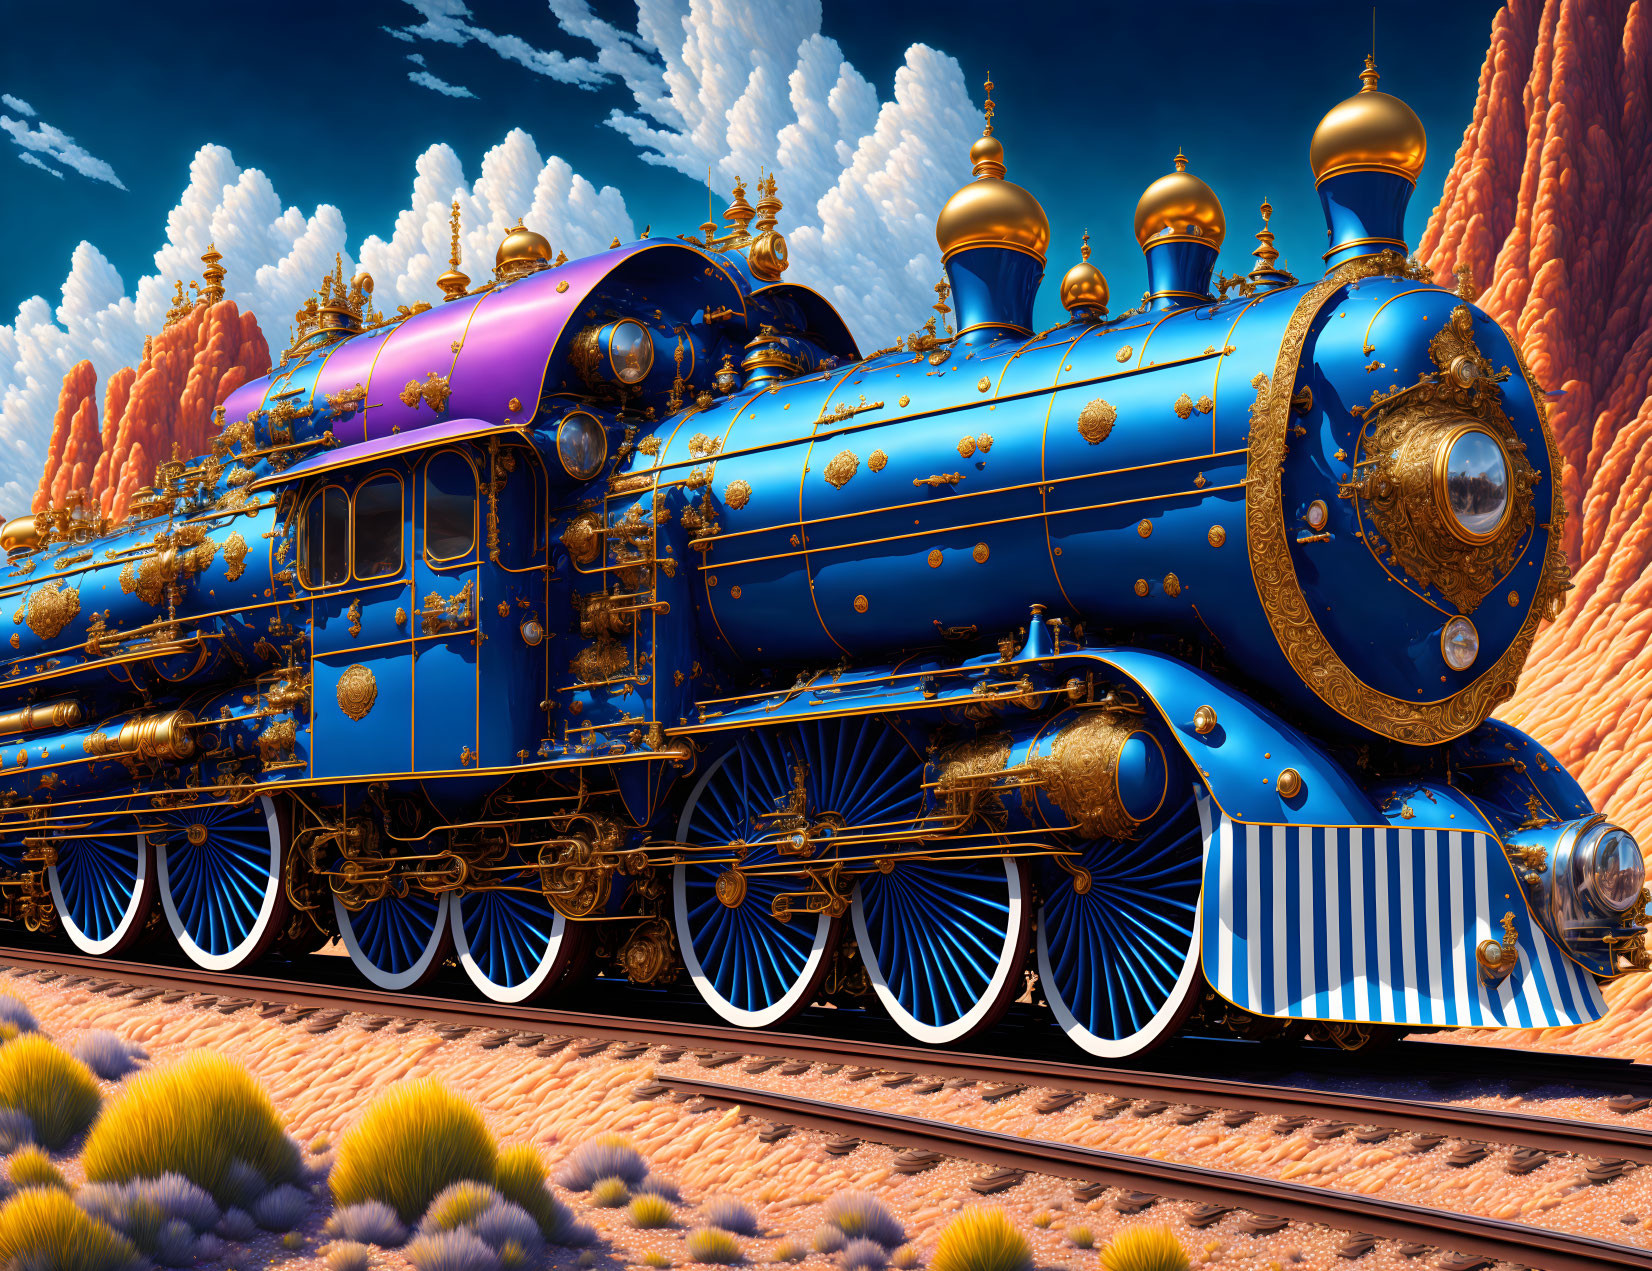 Blue and Gold Steam Locomotive on Tracks with Whimsical Architecture in Desert Landscape